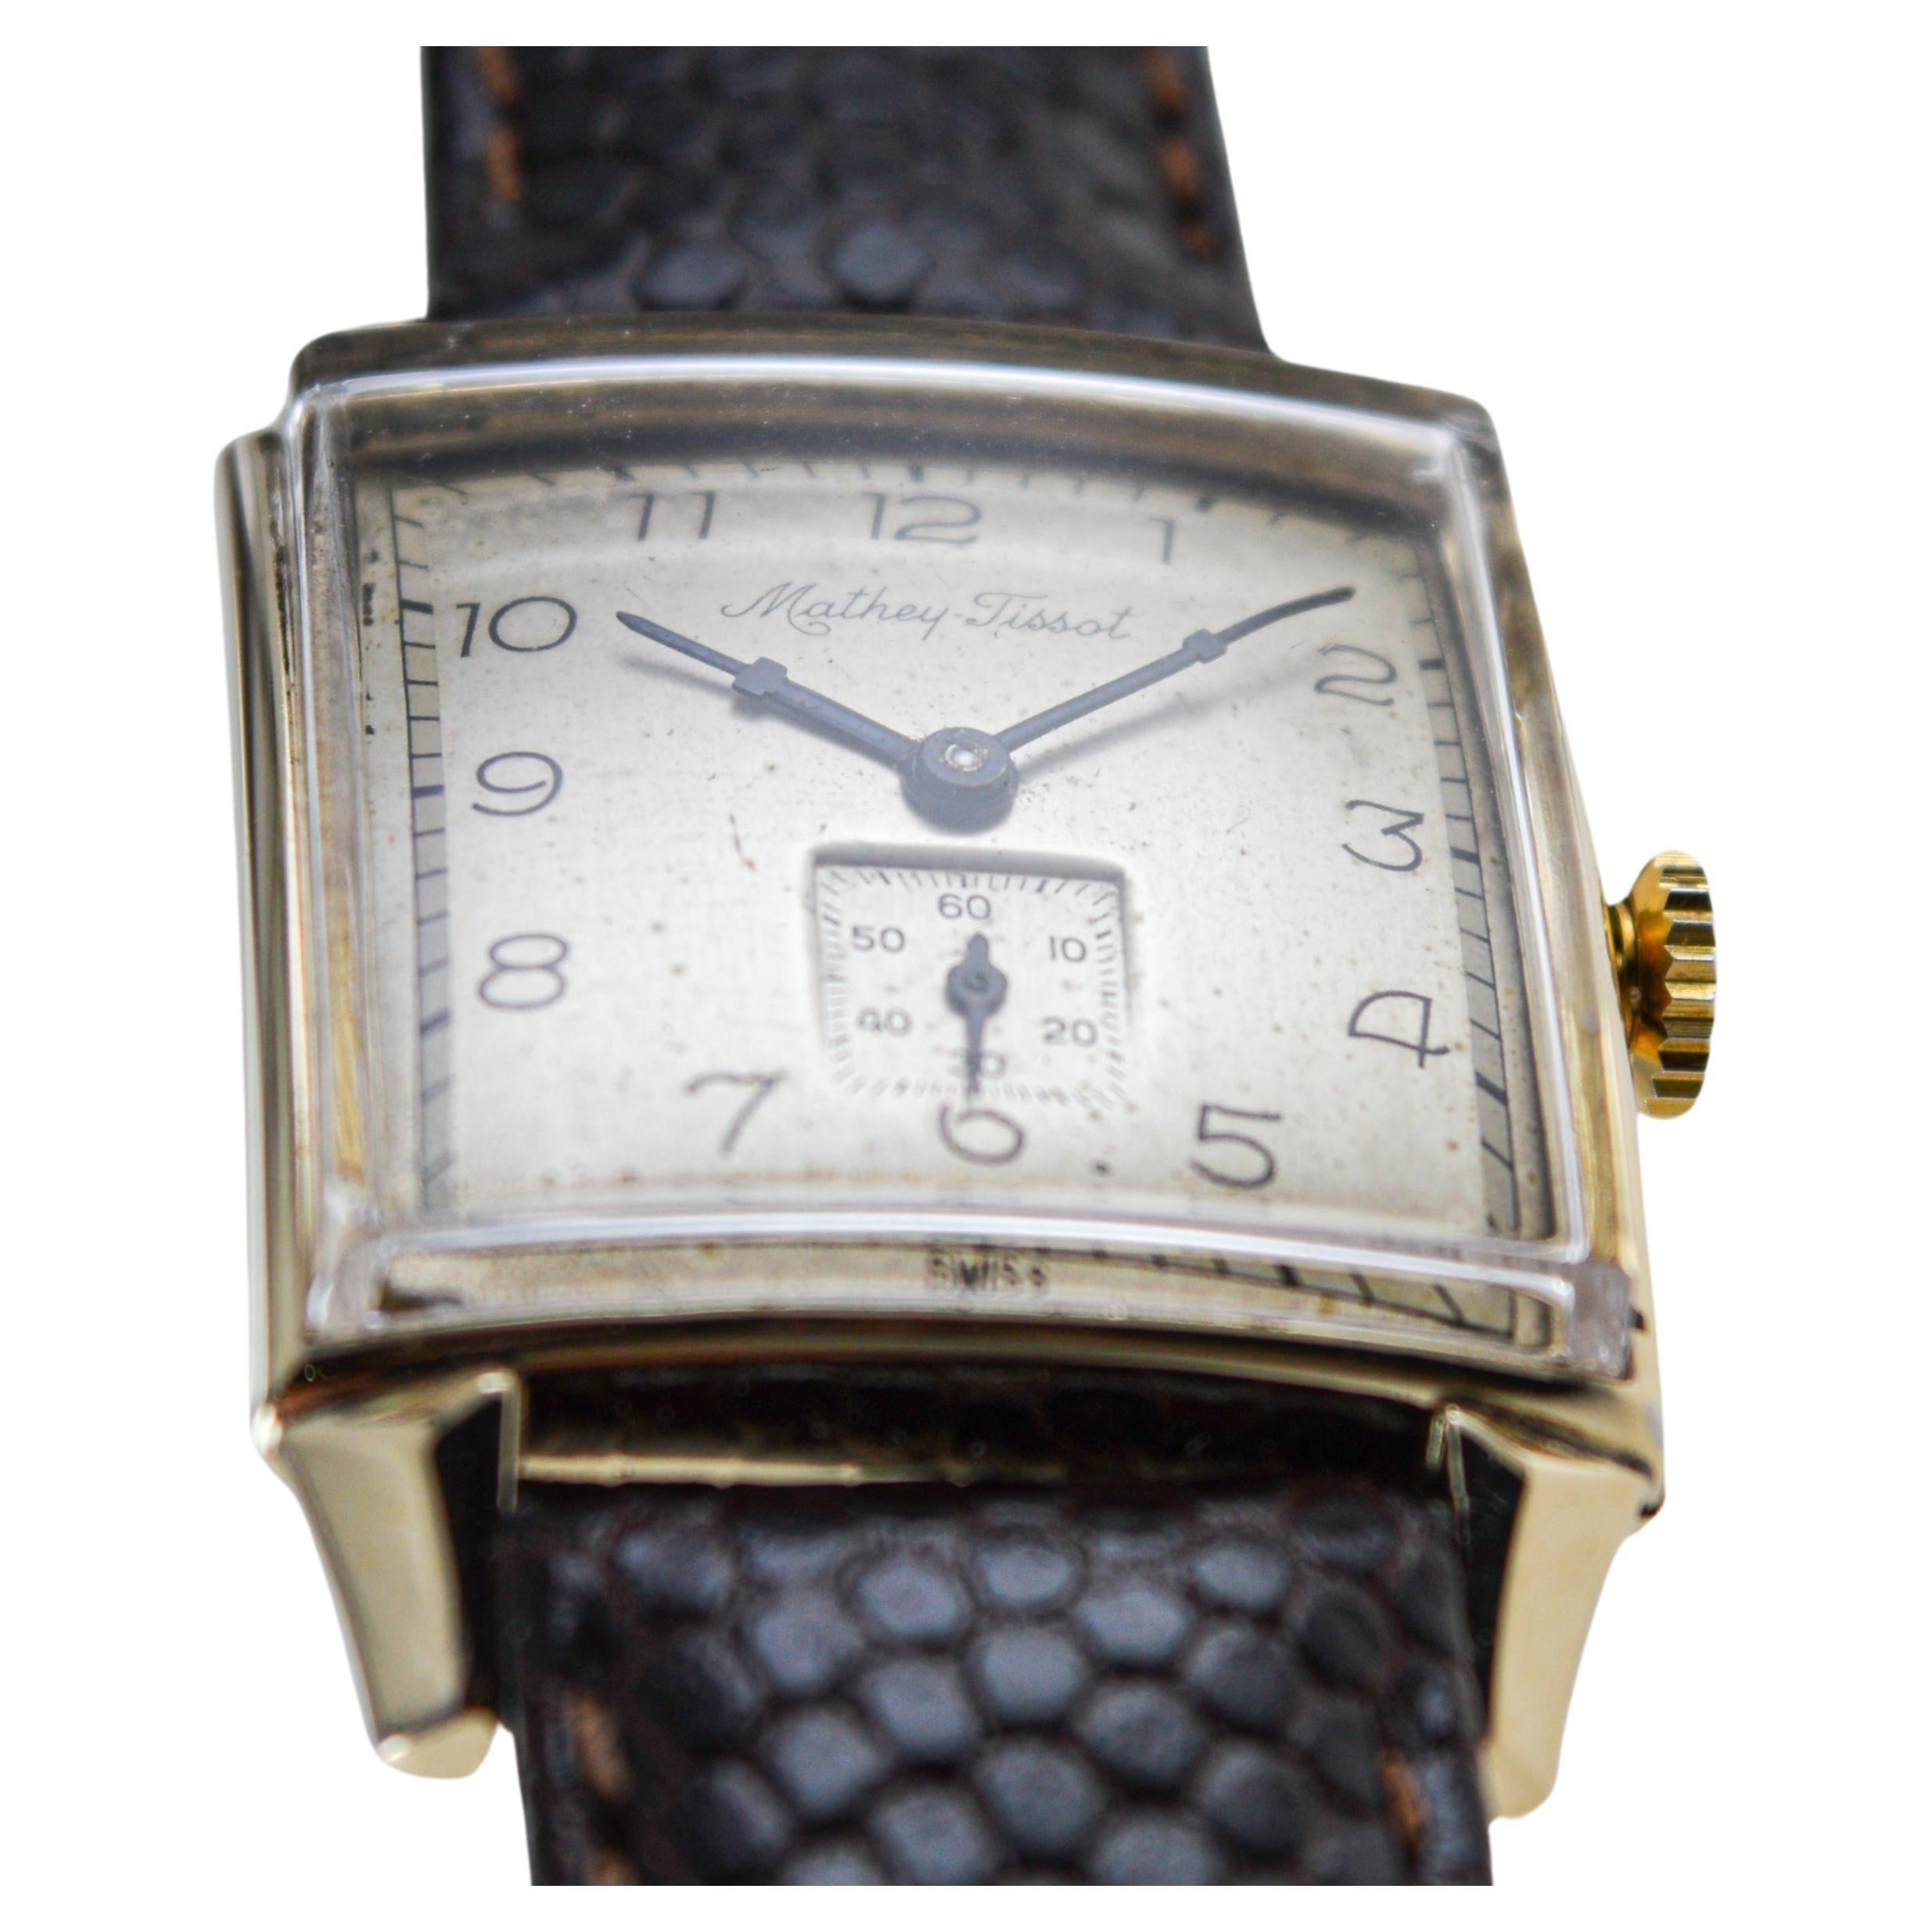 Mathey Tissot Gold Filled Watch in New Condition, Circa 1940's In Excellent Condition For Sale In Long Beach, CA